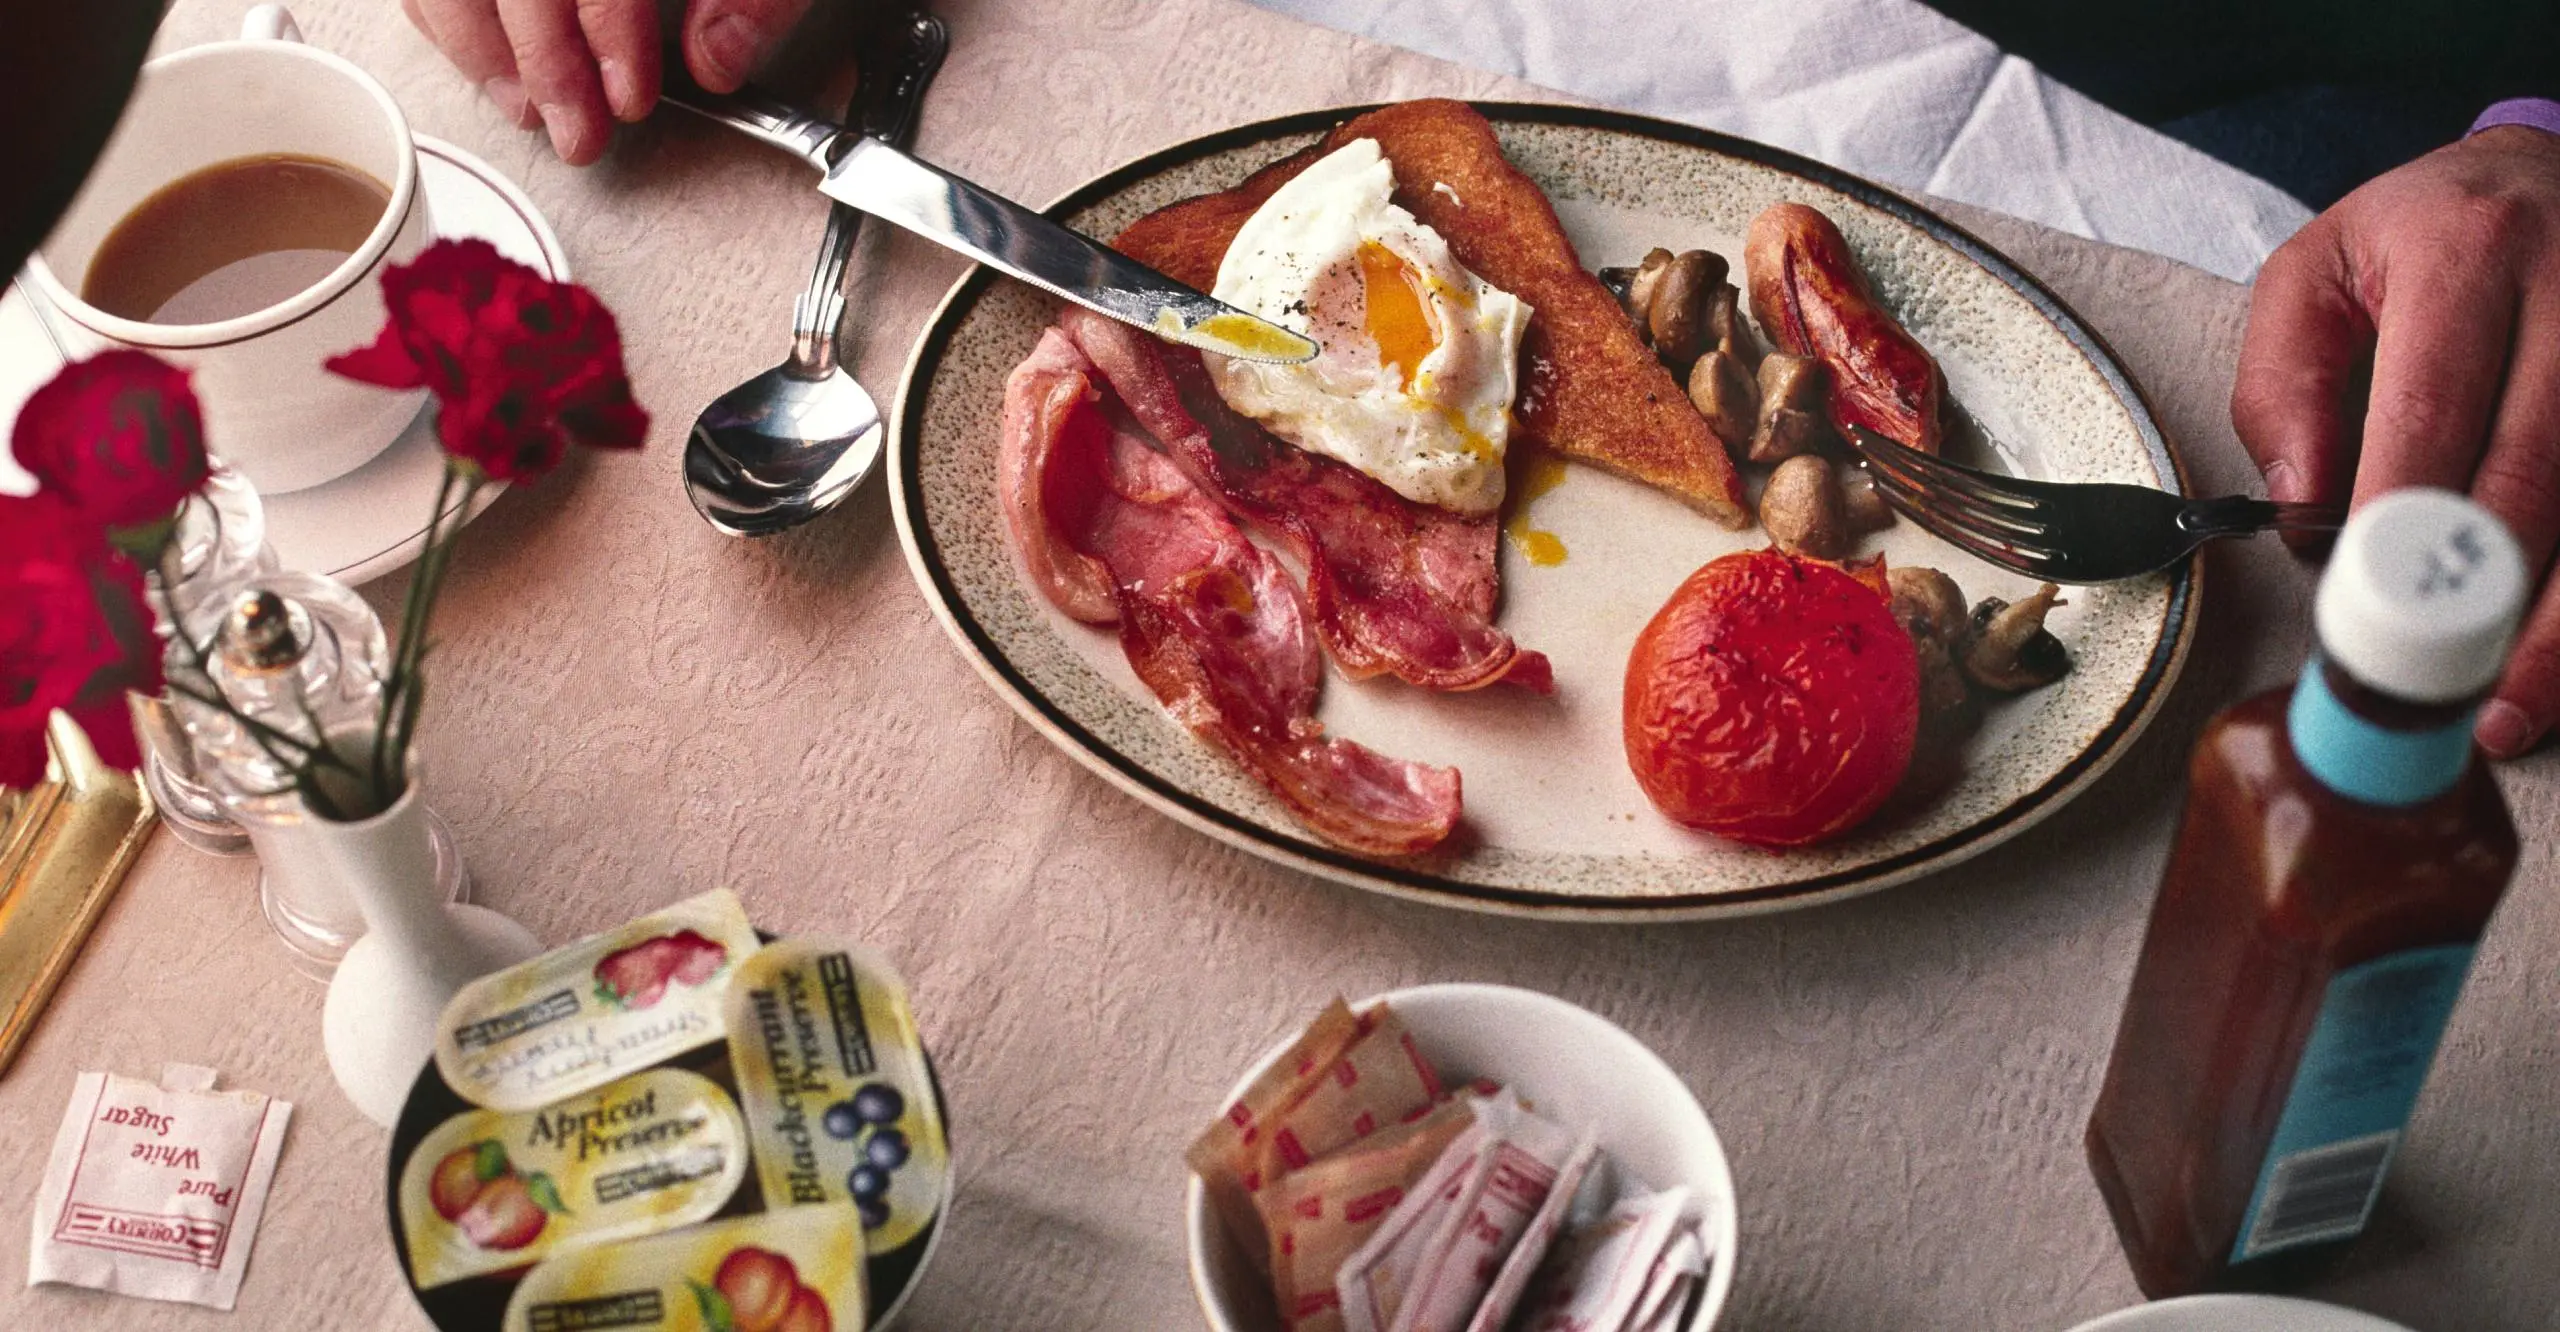 Colour photograph of a table set with someone eating a cooked breakfast of bacon, egg, sausage and tomato